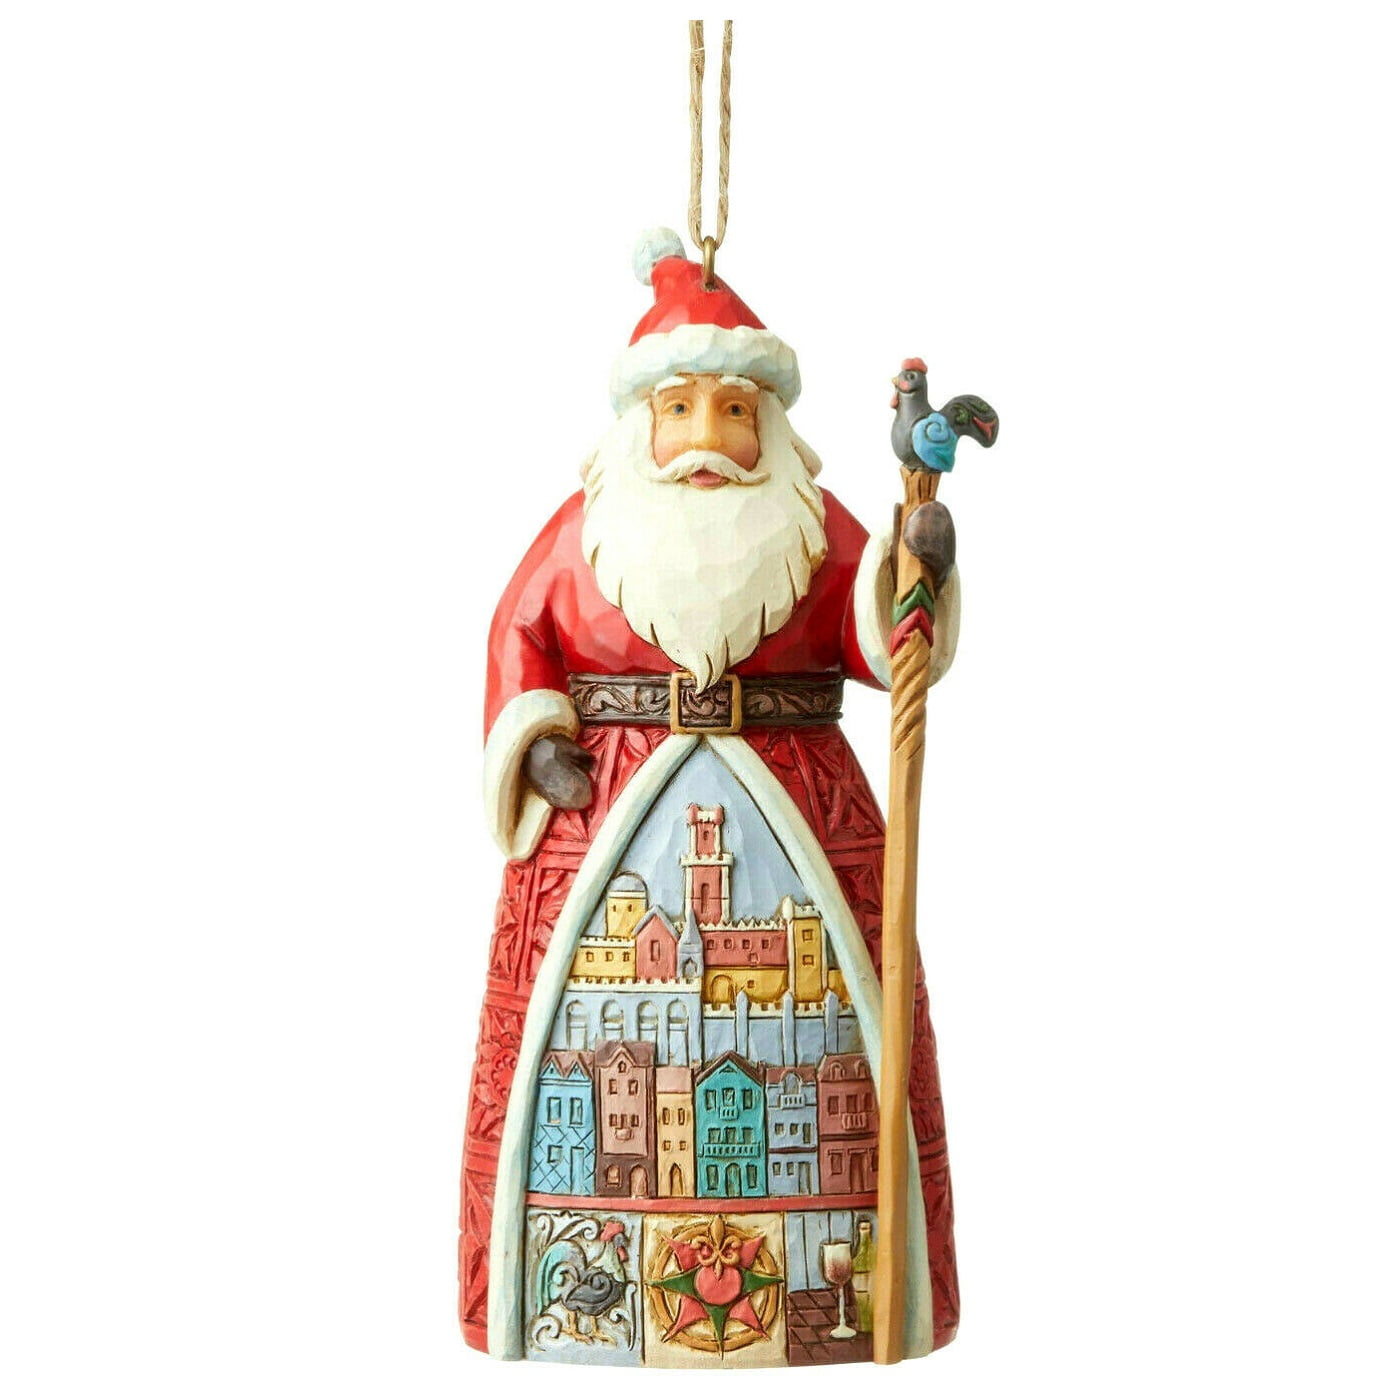 Details about   Jim Shore Wendell August Heartwood Creek Santa Holiday Ornament Aluminum **NEW** 